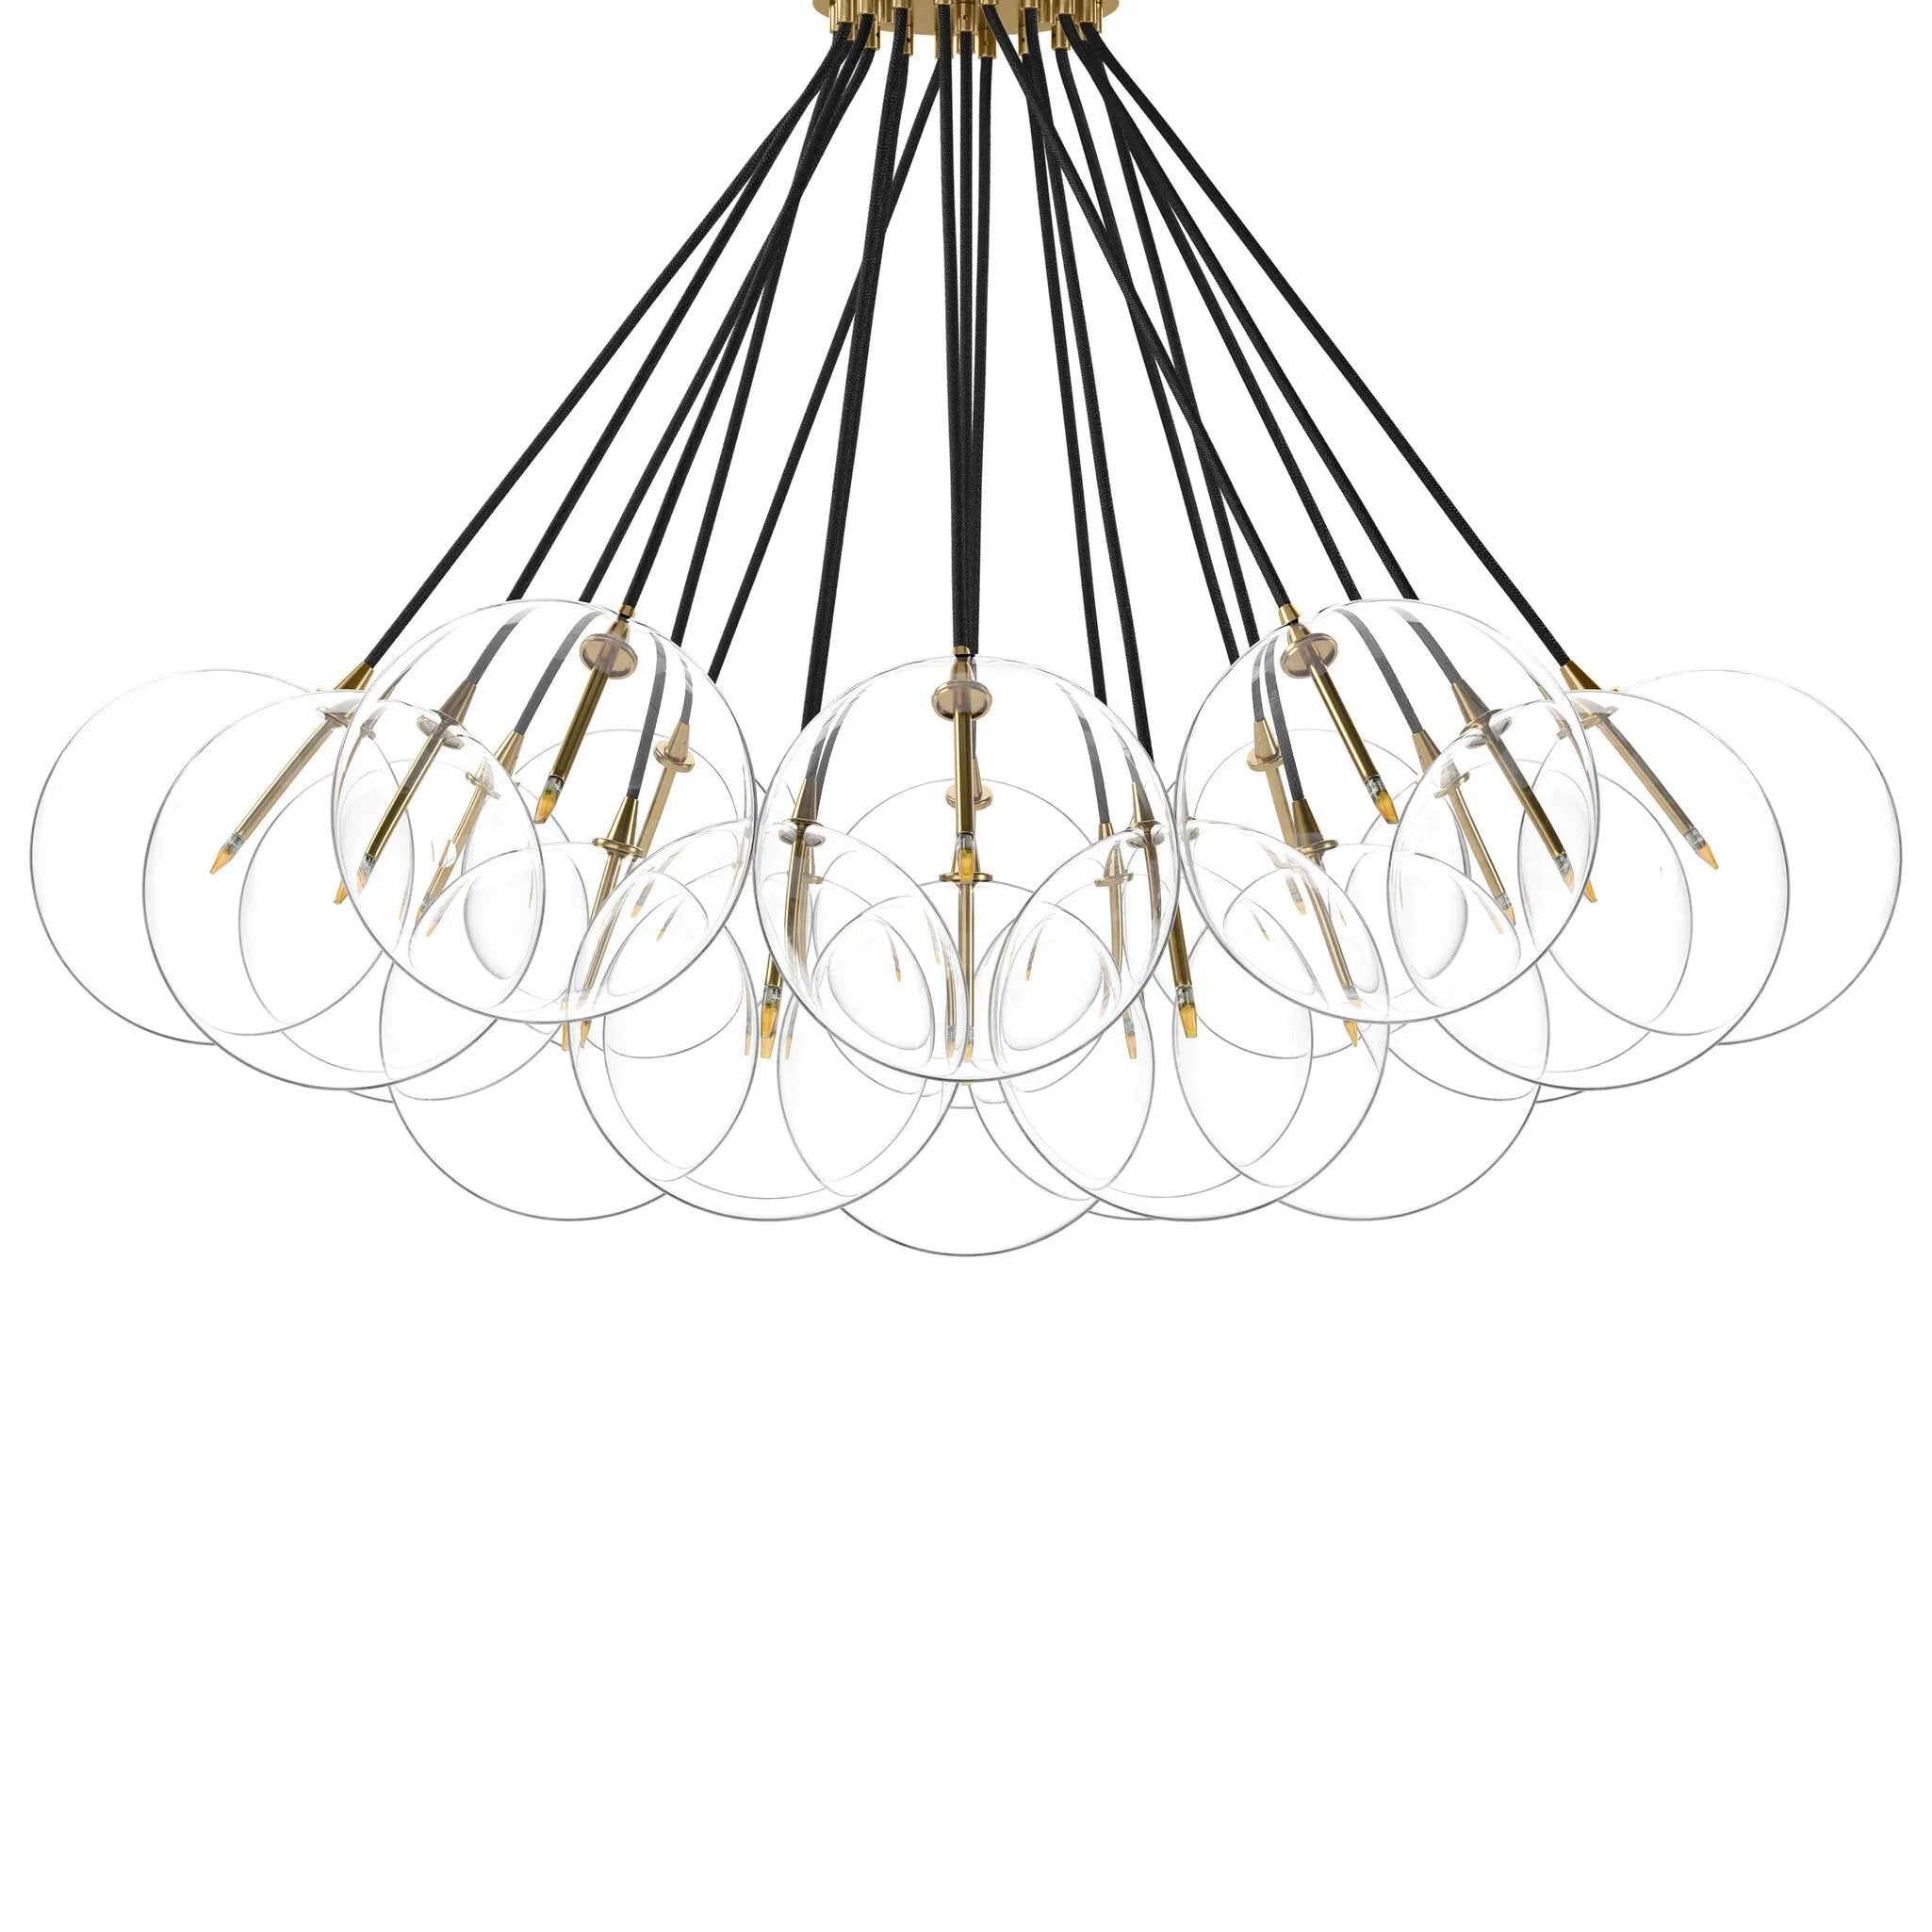 Clear glass bulbs dangle for a statement-making centerpiece. Each globe is individually blown, shaped and sculpted by hand through a one-hour process. Brass and glass are 98% recyclable. Designed and sustainably crafted in Poland by Schwung.Overall Dimensions47.00"w x 47.00"d x 33.50"hFull Details &amp; SpecificationsTear Shee Amethyst Home provides interior design, new home construction design consulting, vintage area rugs, and lighting in the Scottsdale metro area.